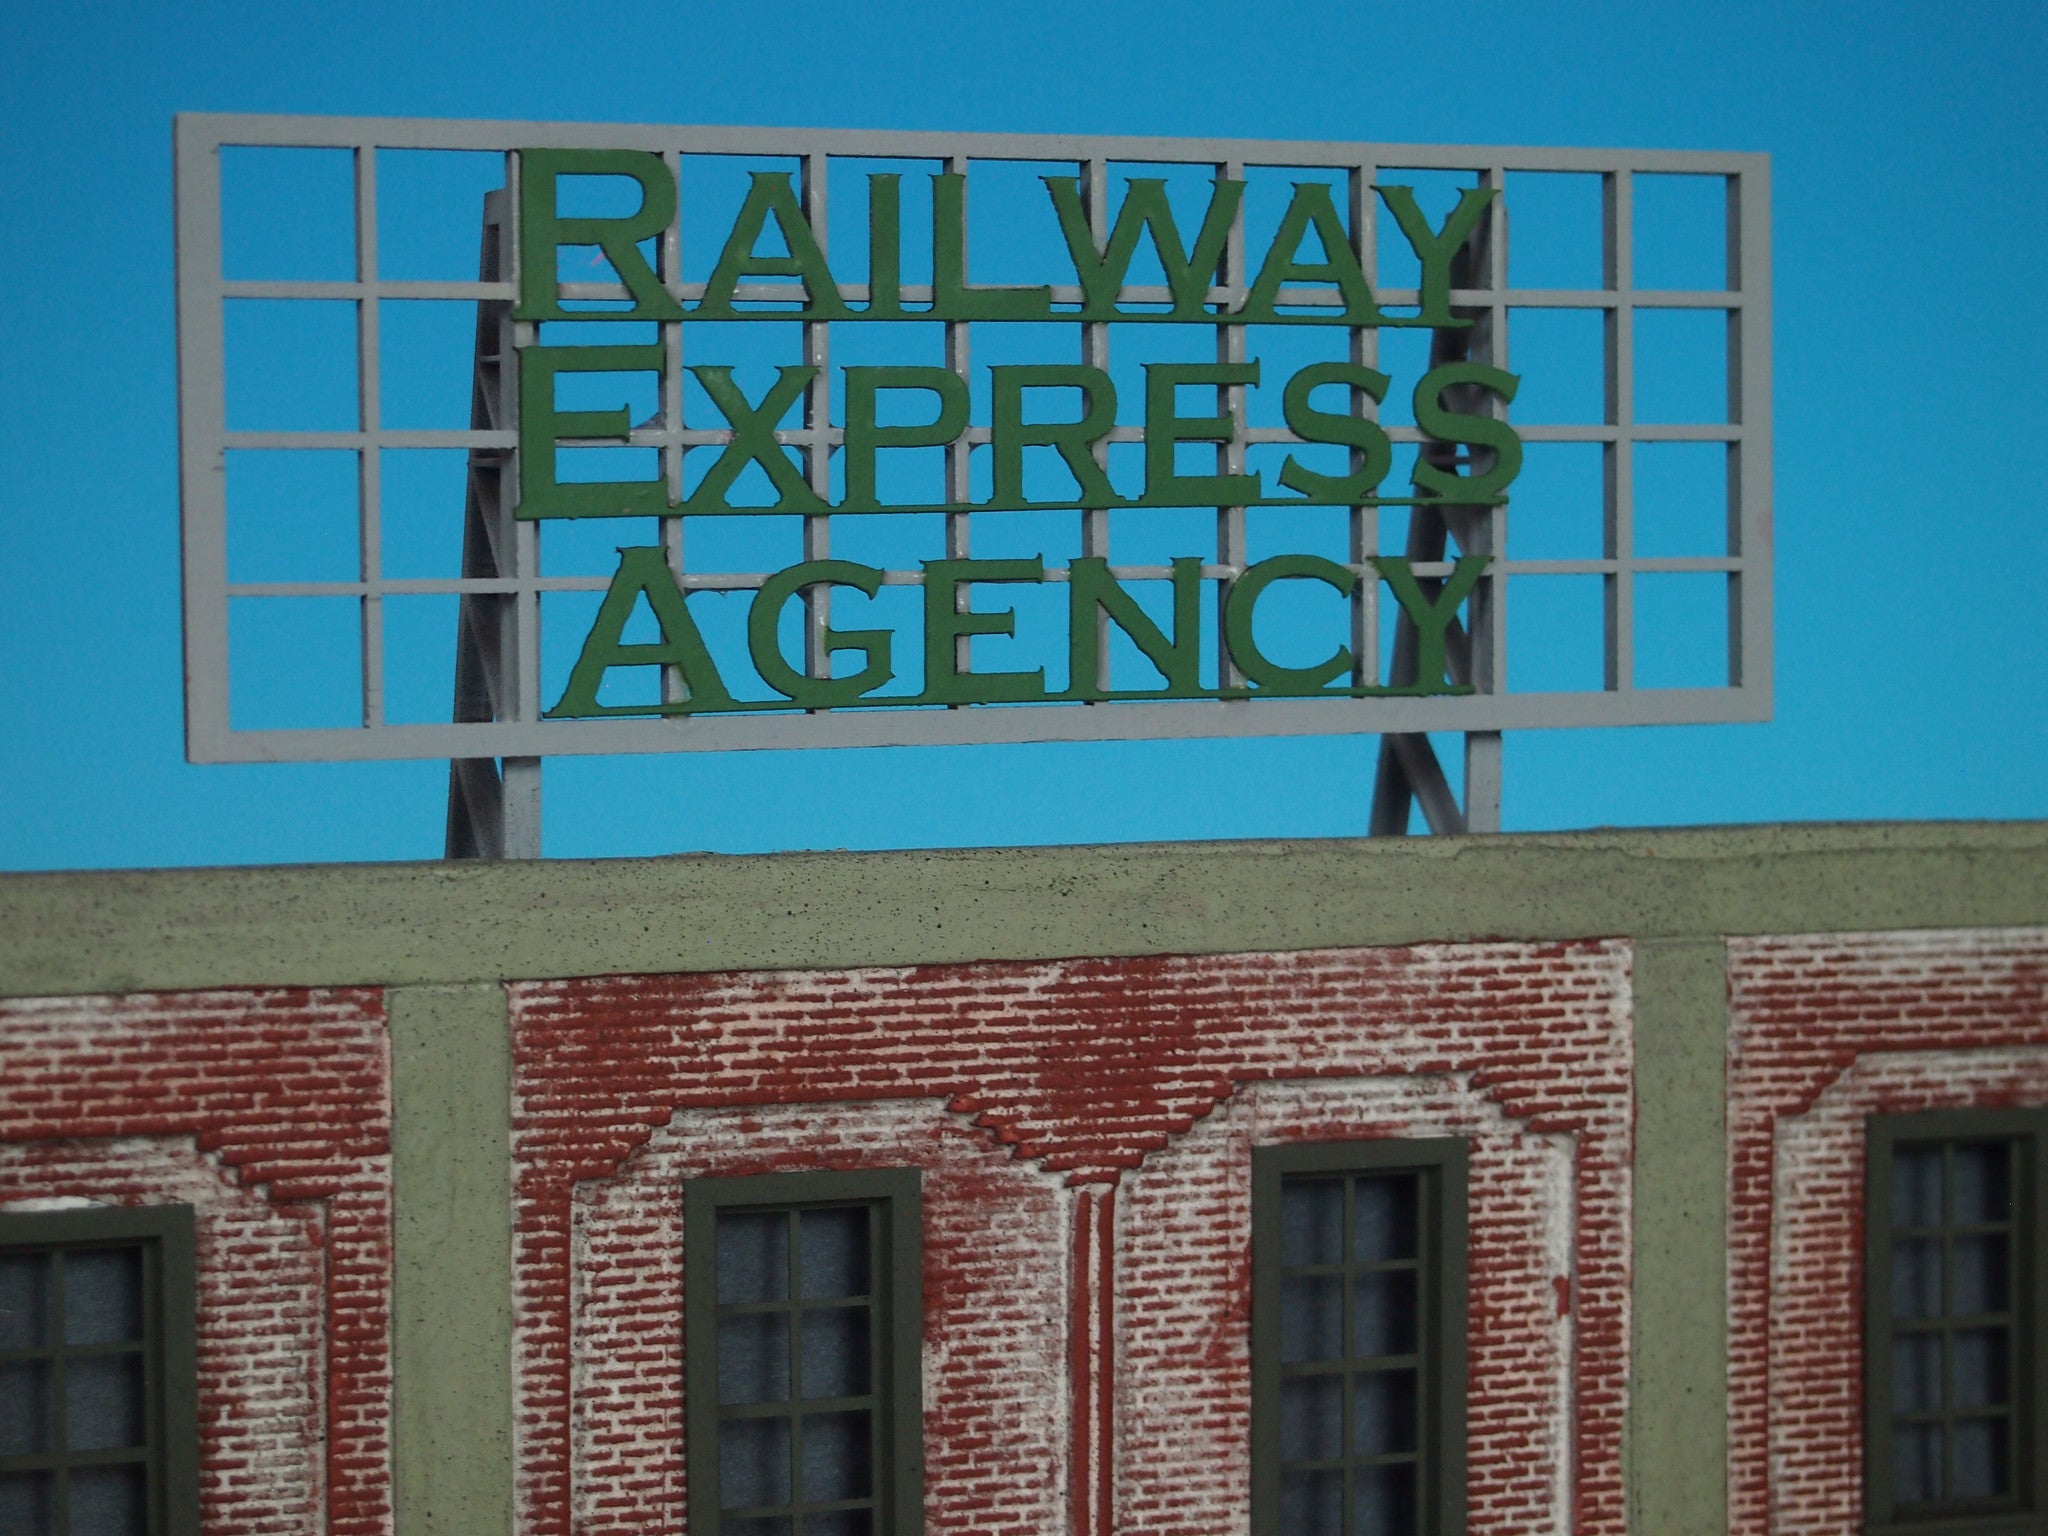 Korber Models #D0026 - O Scale - Roof Top Sign "Railway Express Agency"